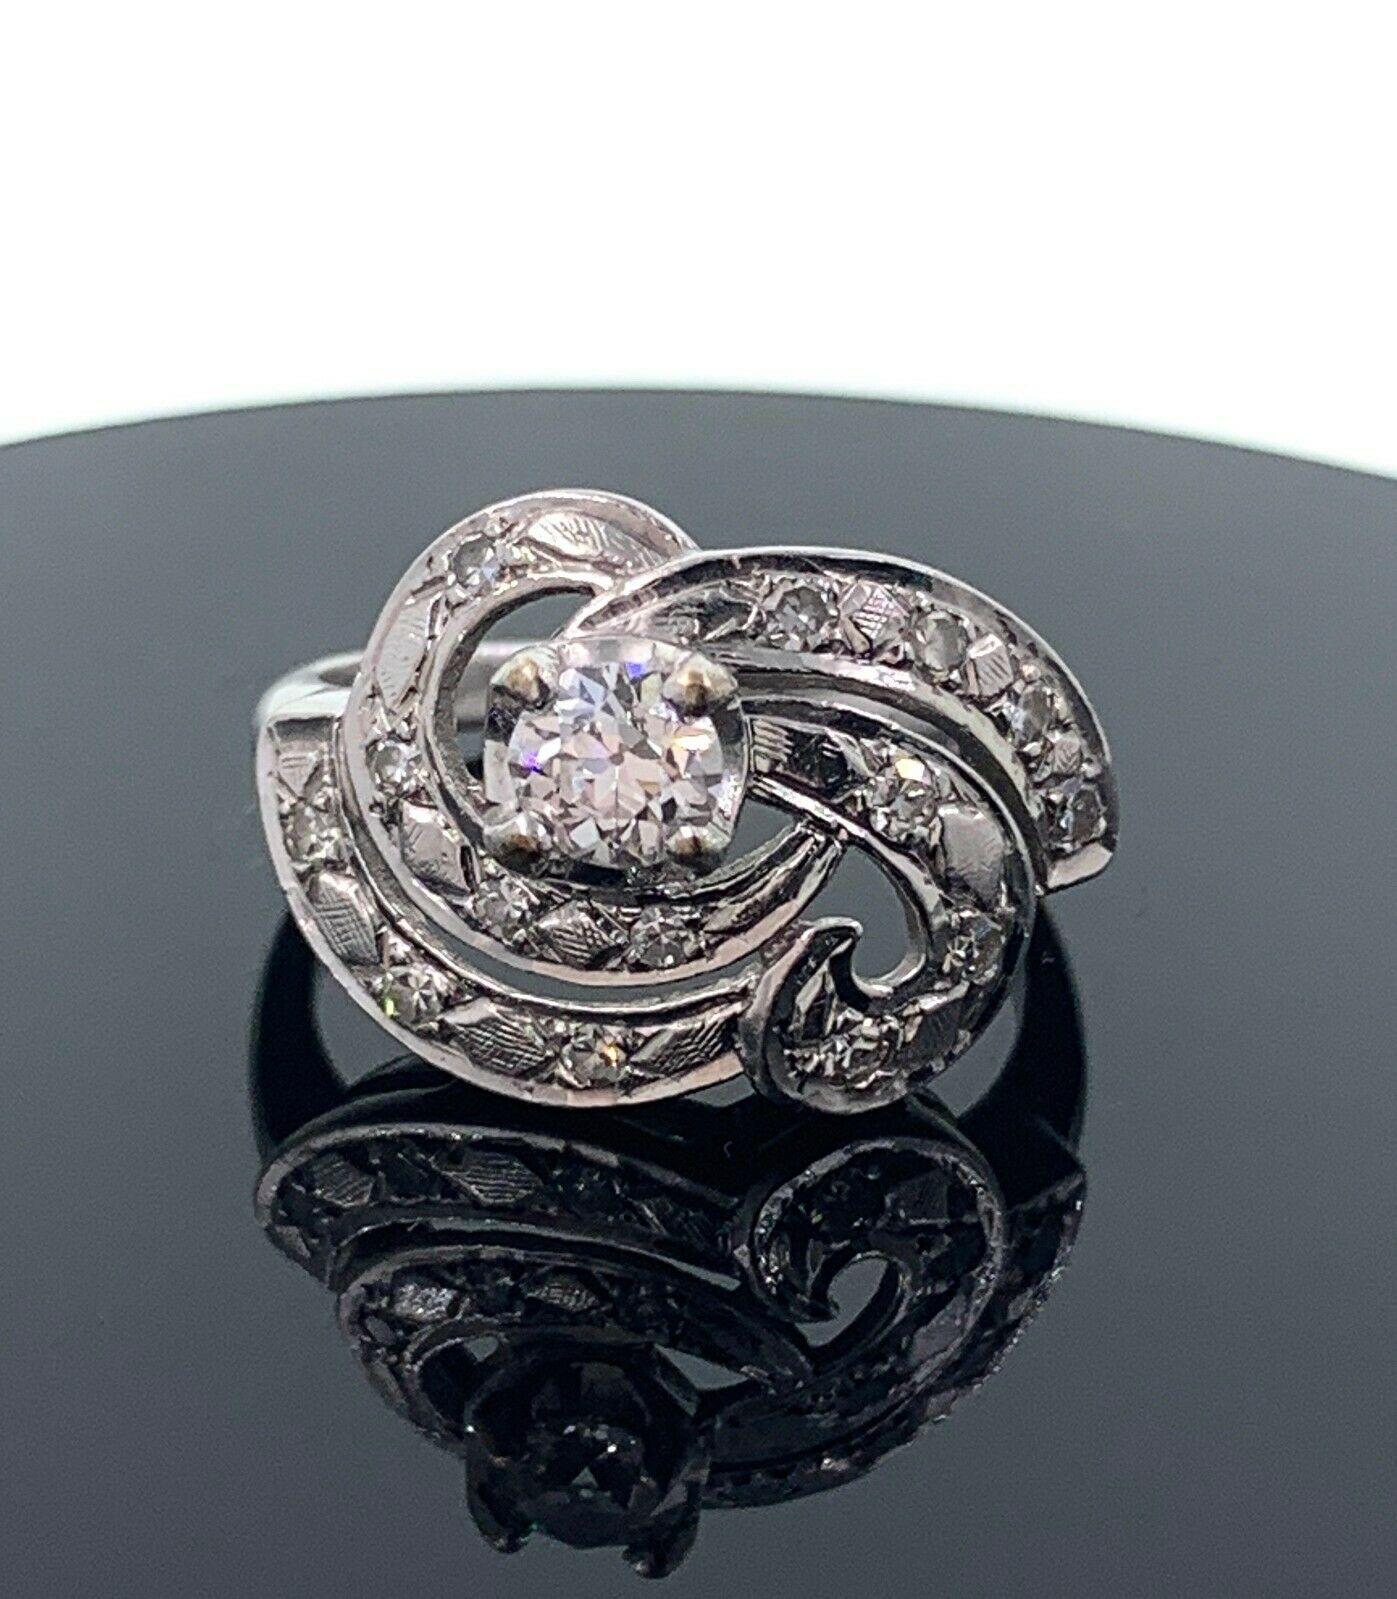 Antique Old European Cut Diamond Swirl Ring 14 Karat White Gold In Excellent Condition For Sale In San Diego, CA